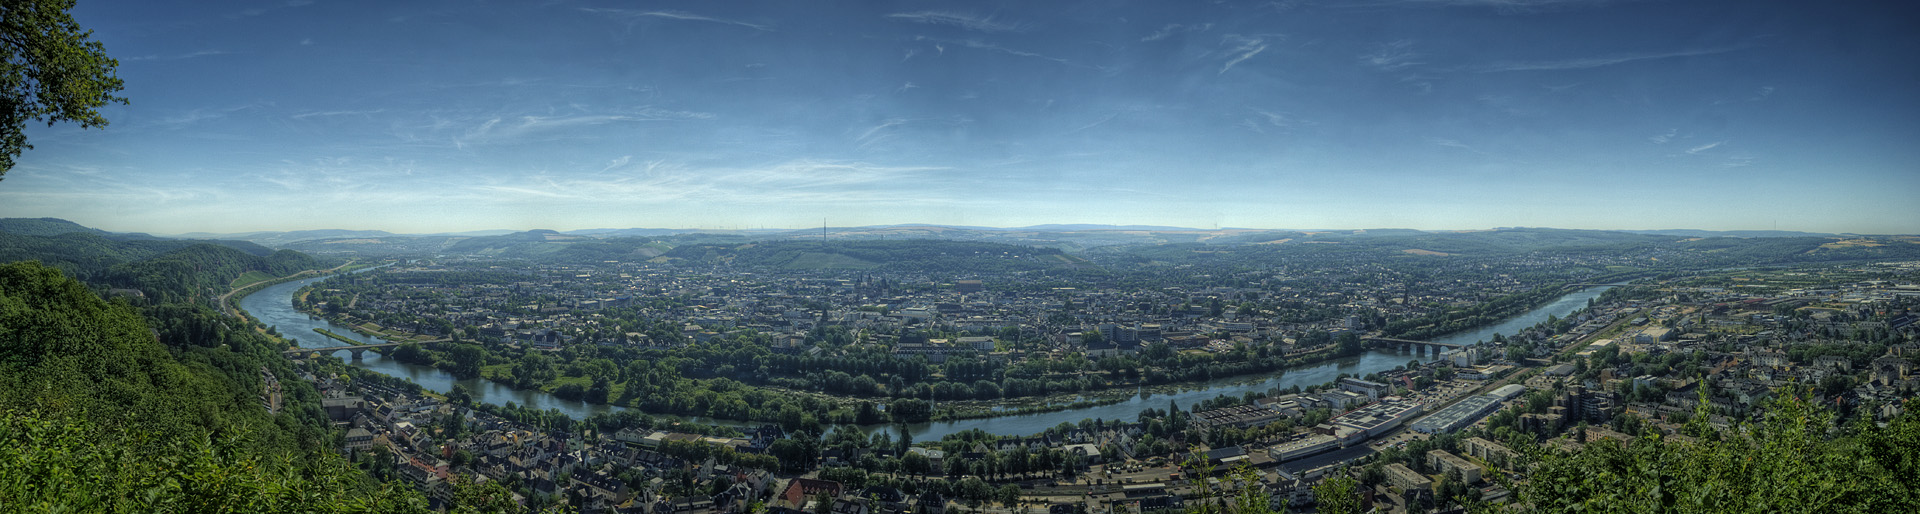 Trier - Day HDR Panorama